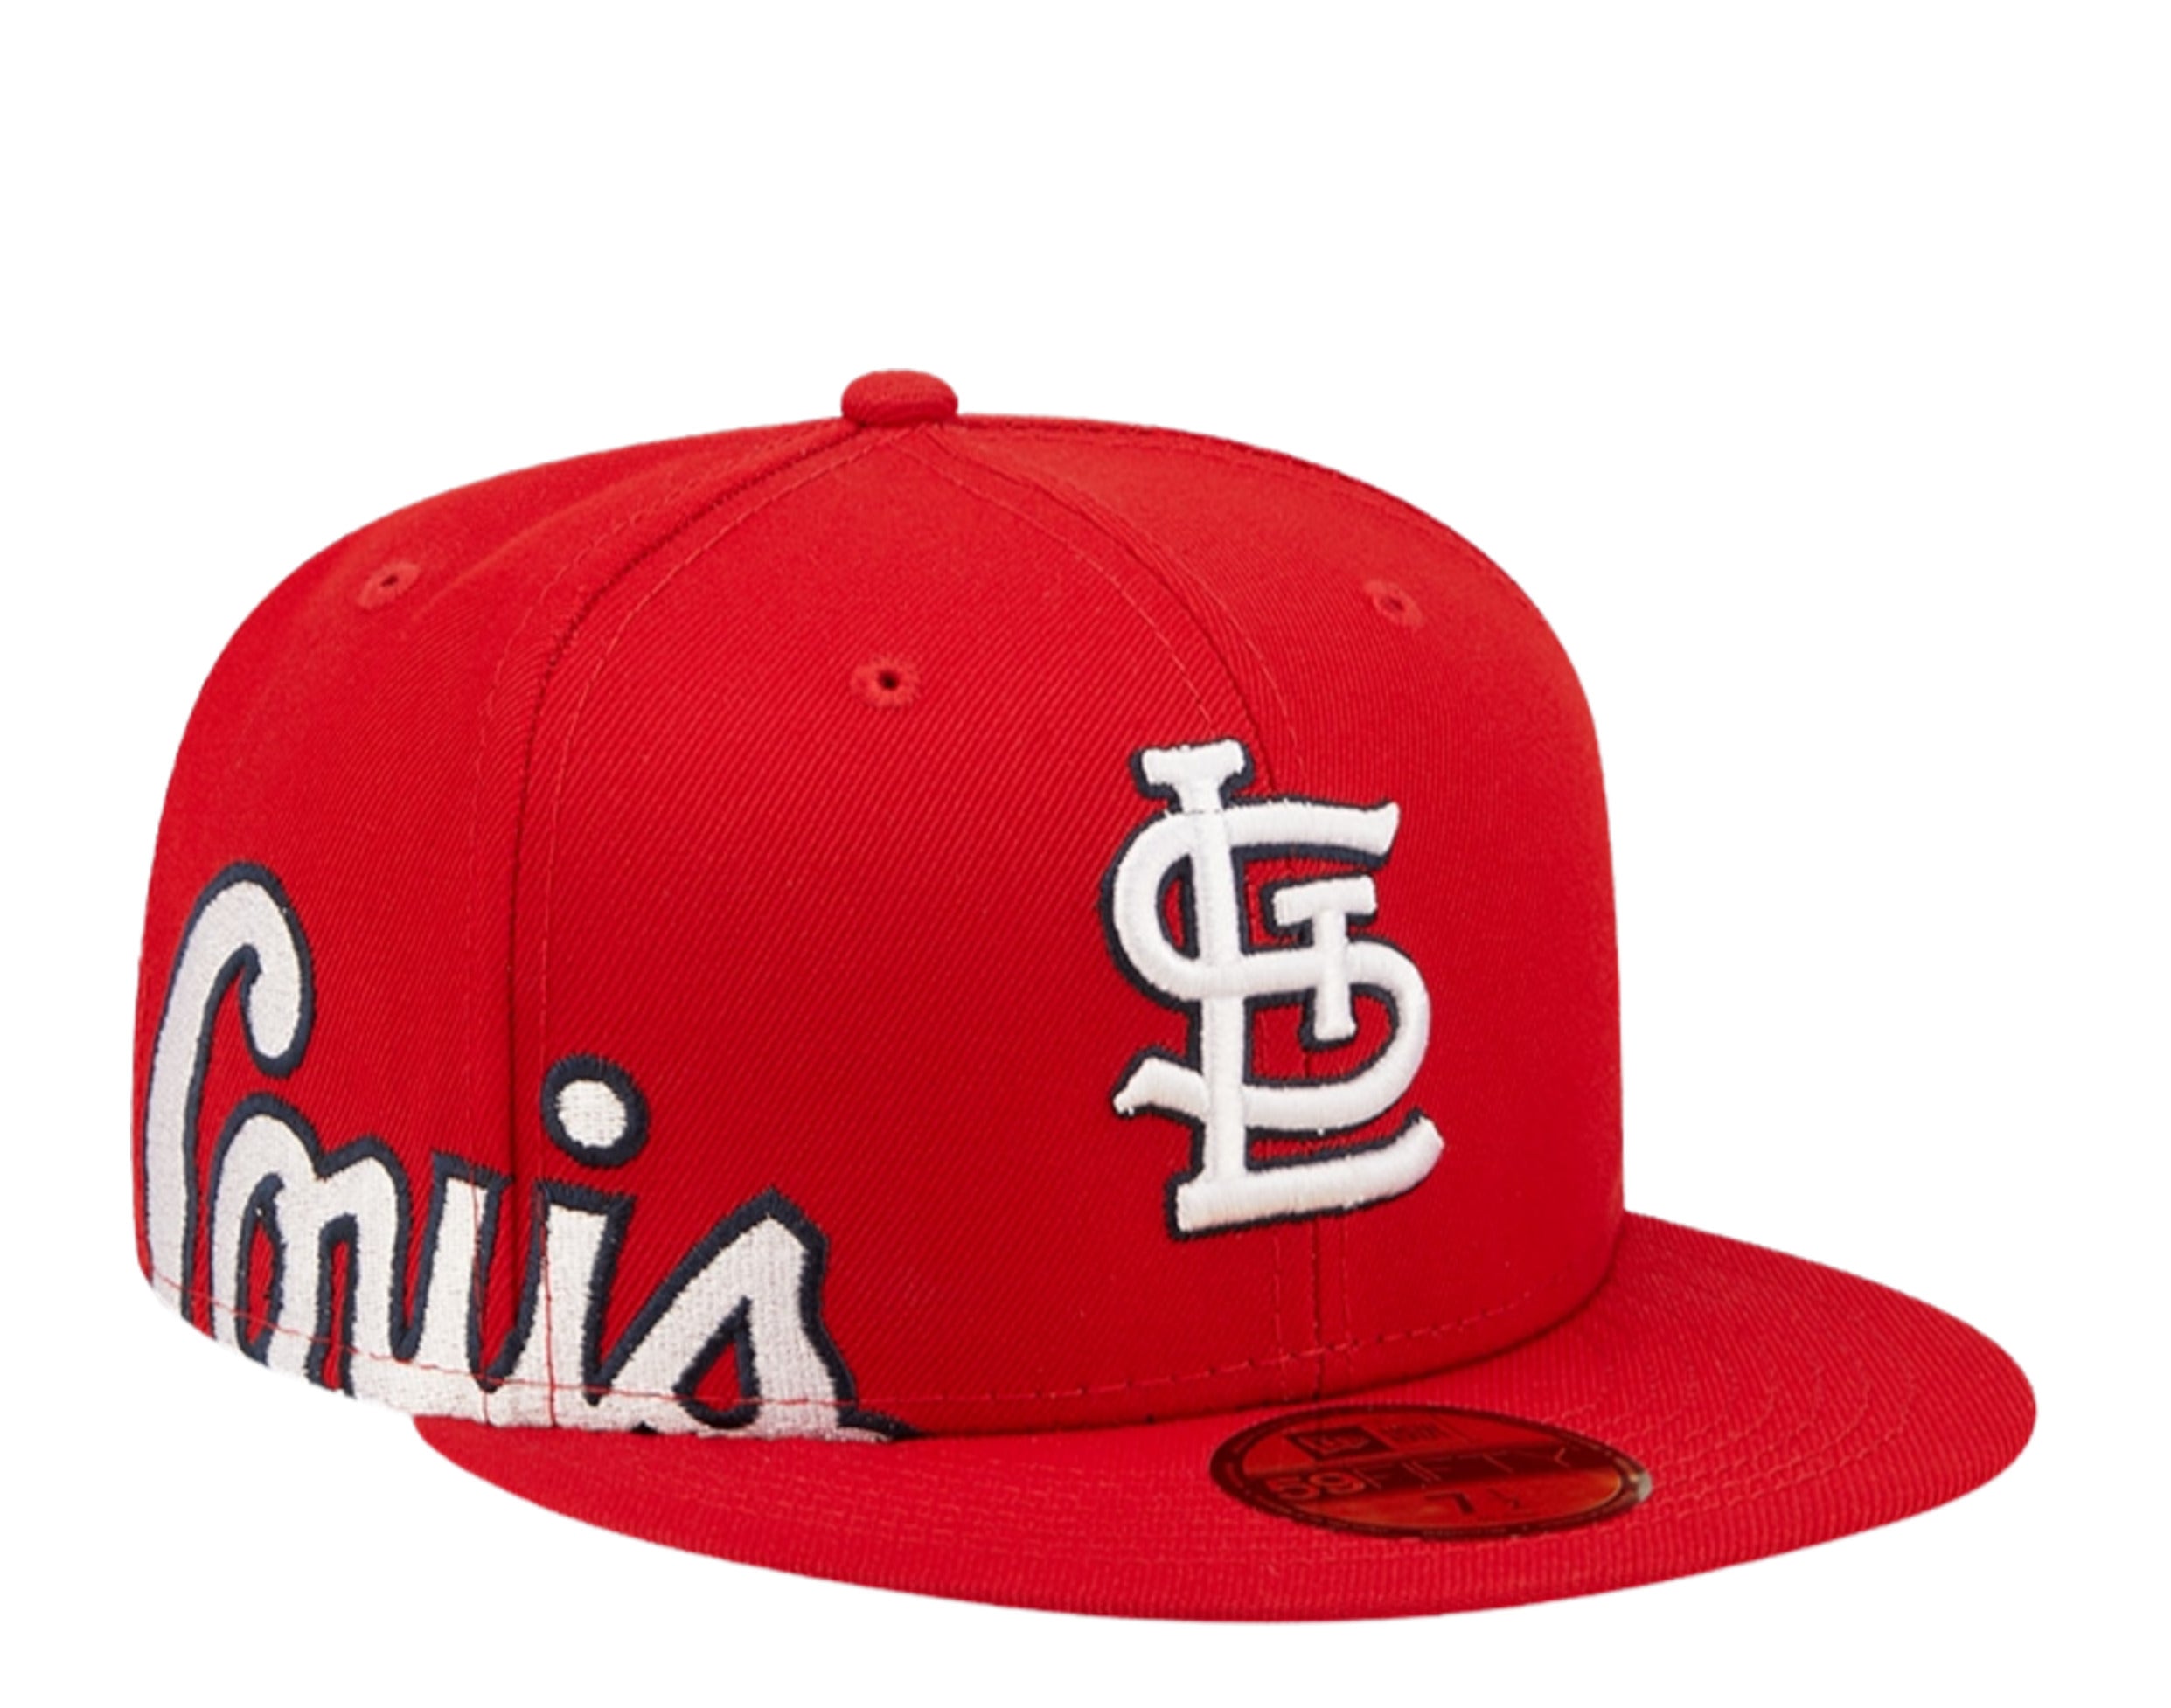 St. Louis Cardinals Duo Logo 59FIFTY Fitted Hat, Red - Size: 7 3/4, MLB by New Era